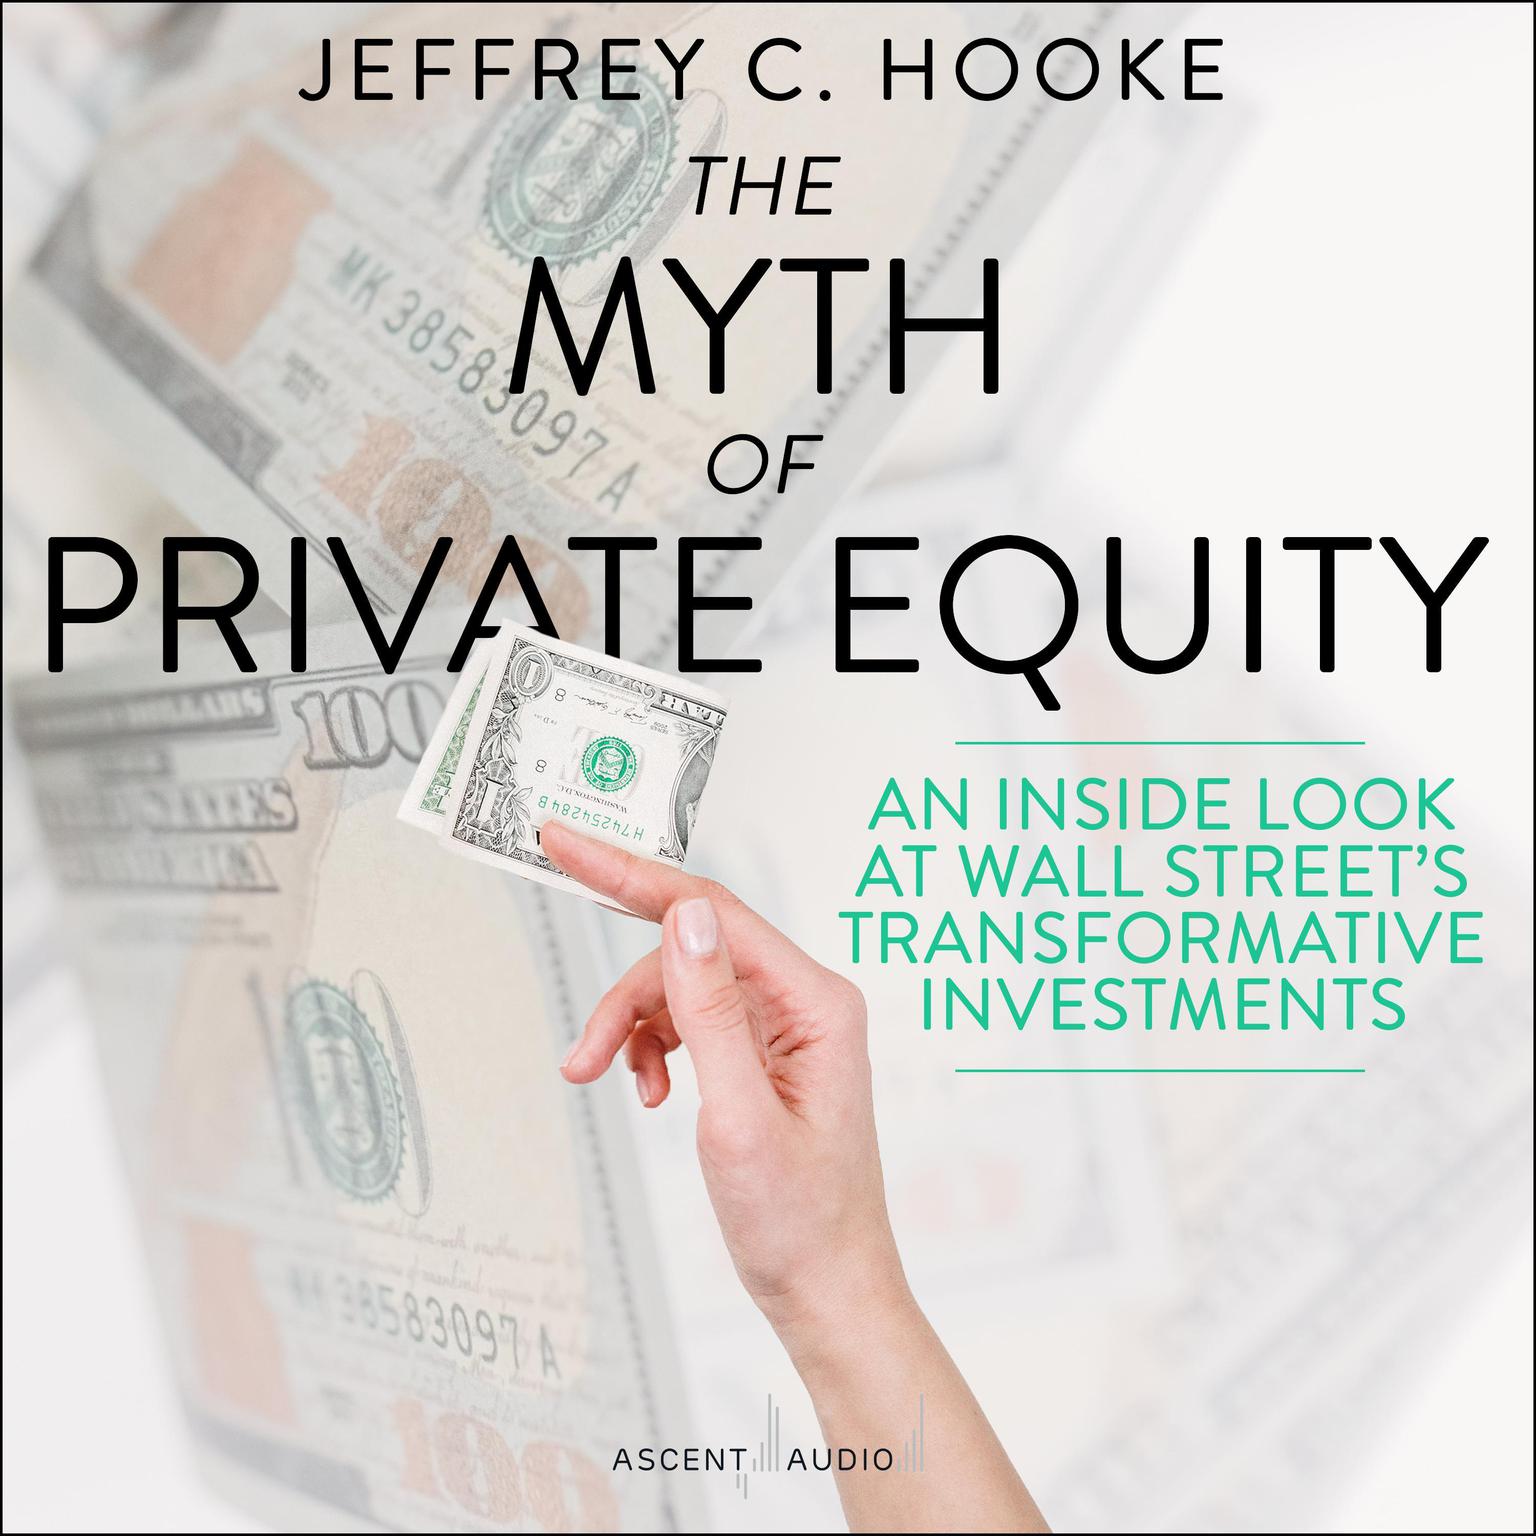 The Myth of Private Equity: An Inside Look at Wall Street’s Transformative Investments Audiobook, by Jeffrey C. Hooke